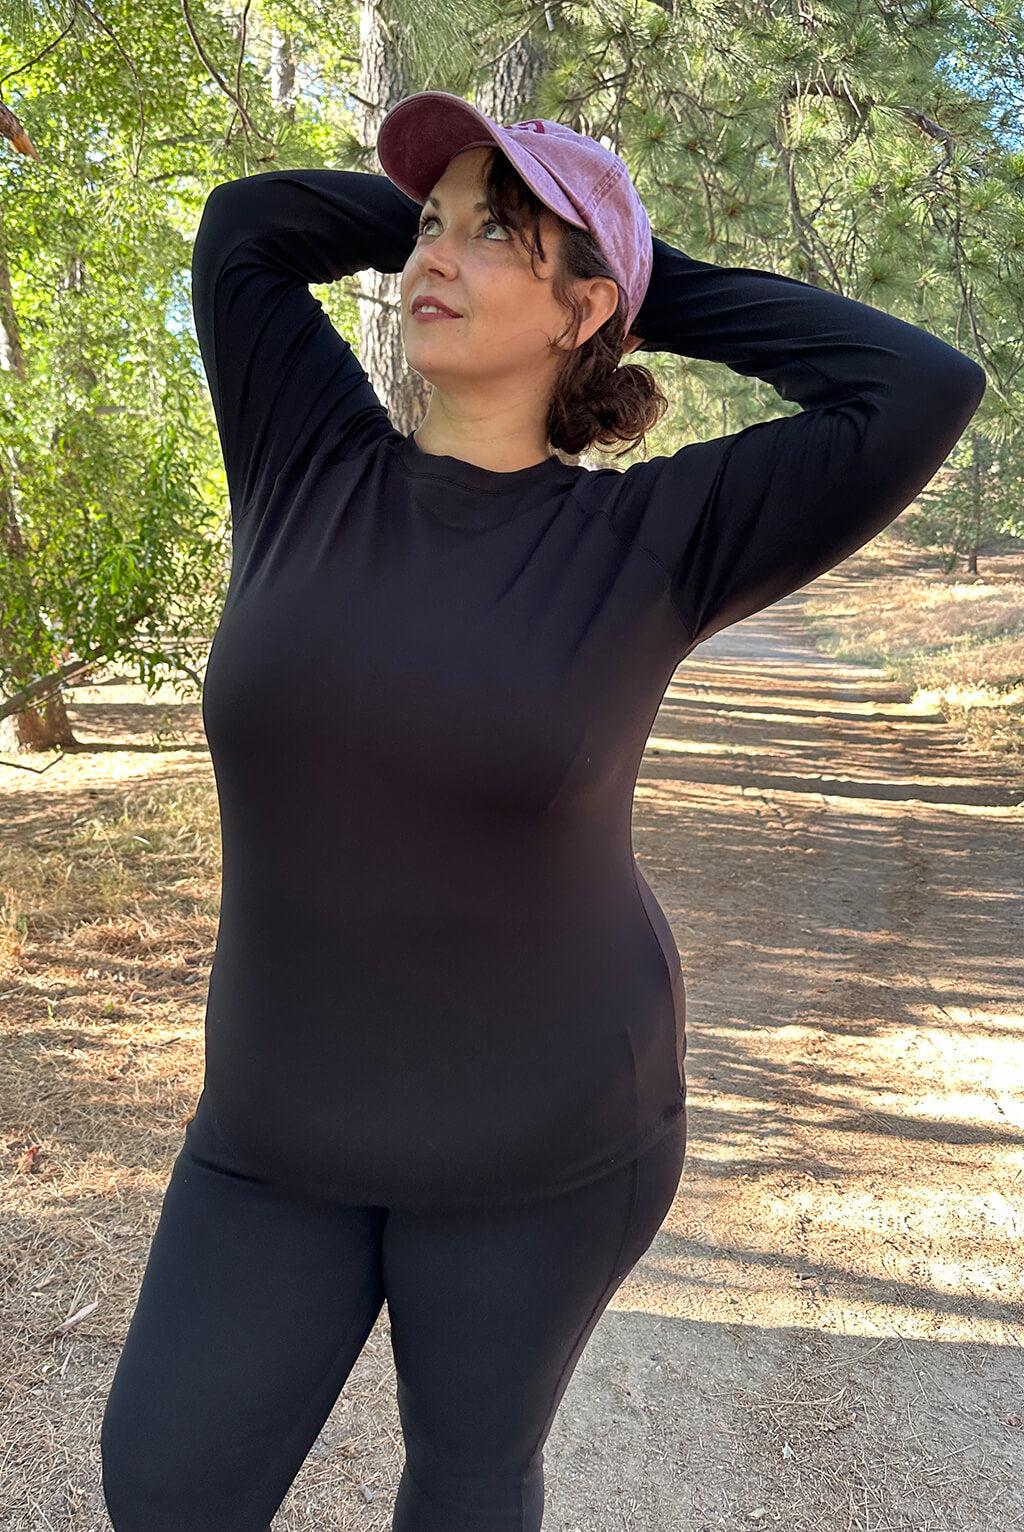 Plus size model with arms behind her head wearing long sleeve compression top.